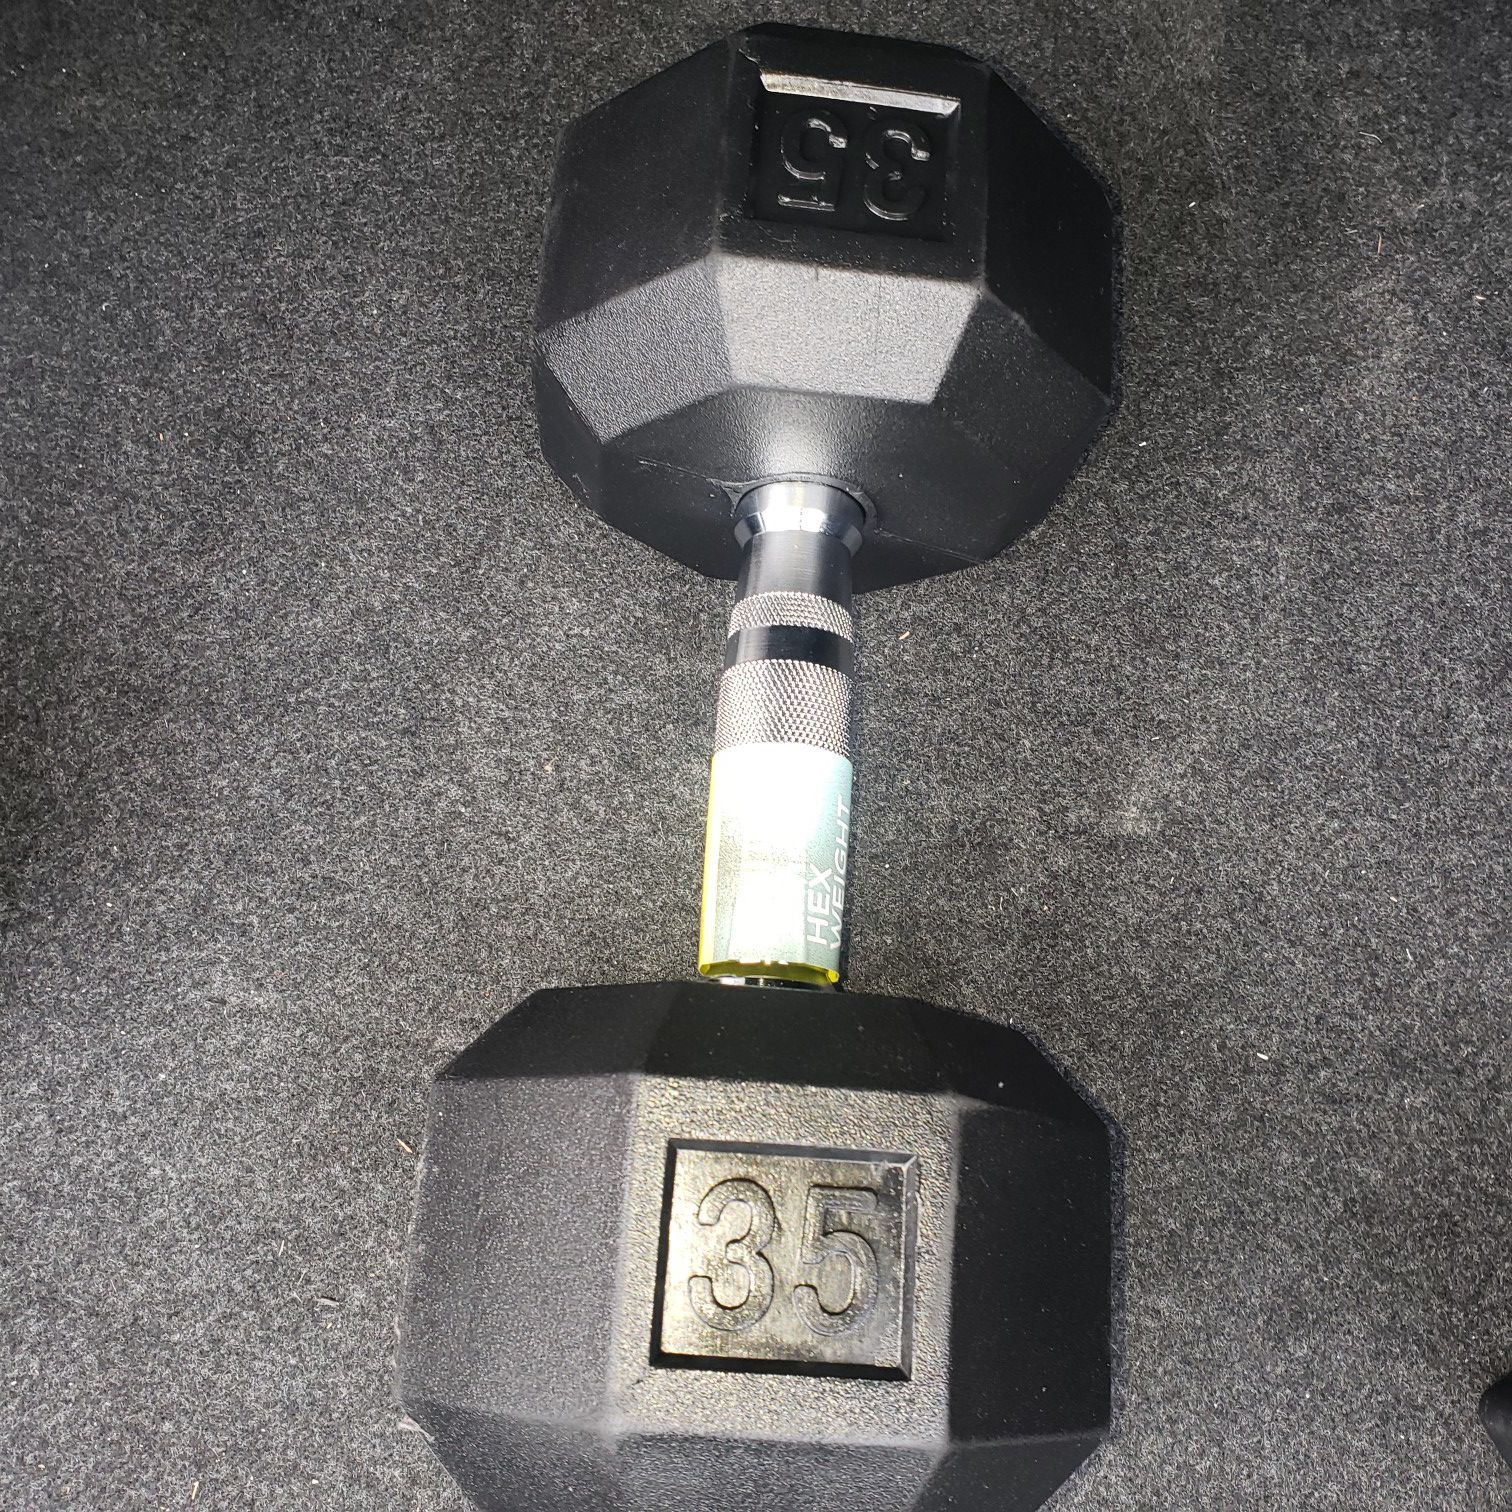 35lbs dumbell